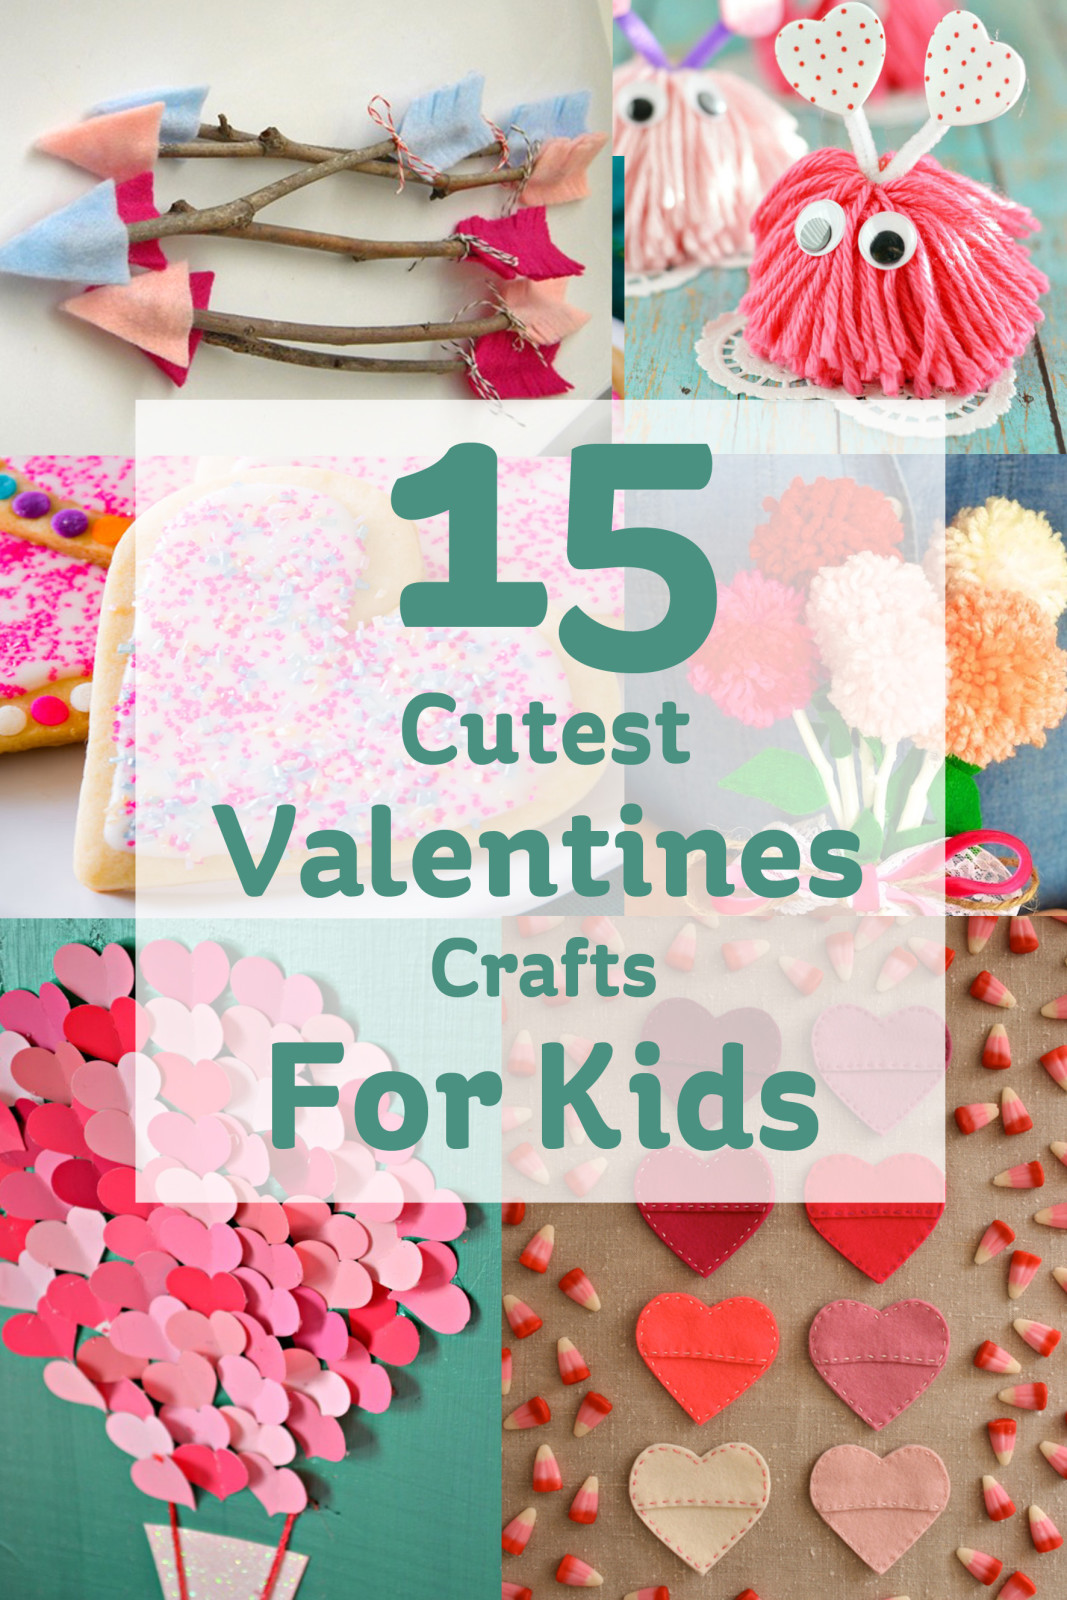 Valentine Crafts Ideas For Toddlers
 15 Cute Valentines Crafts for Kids